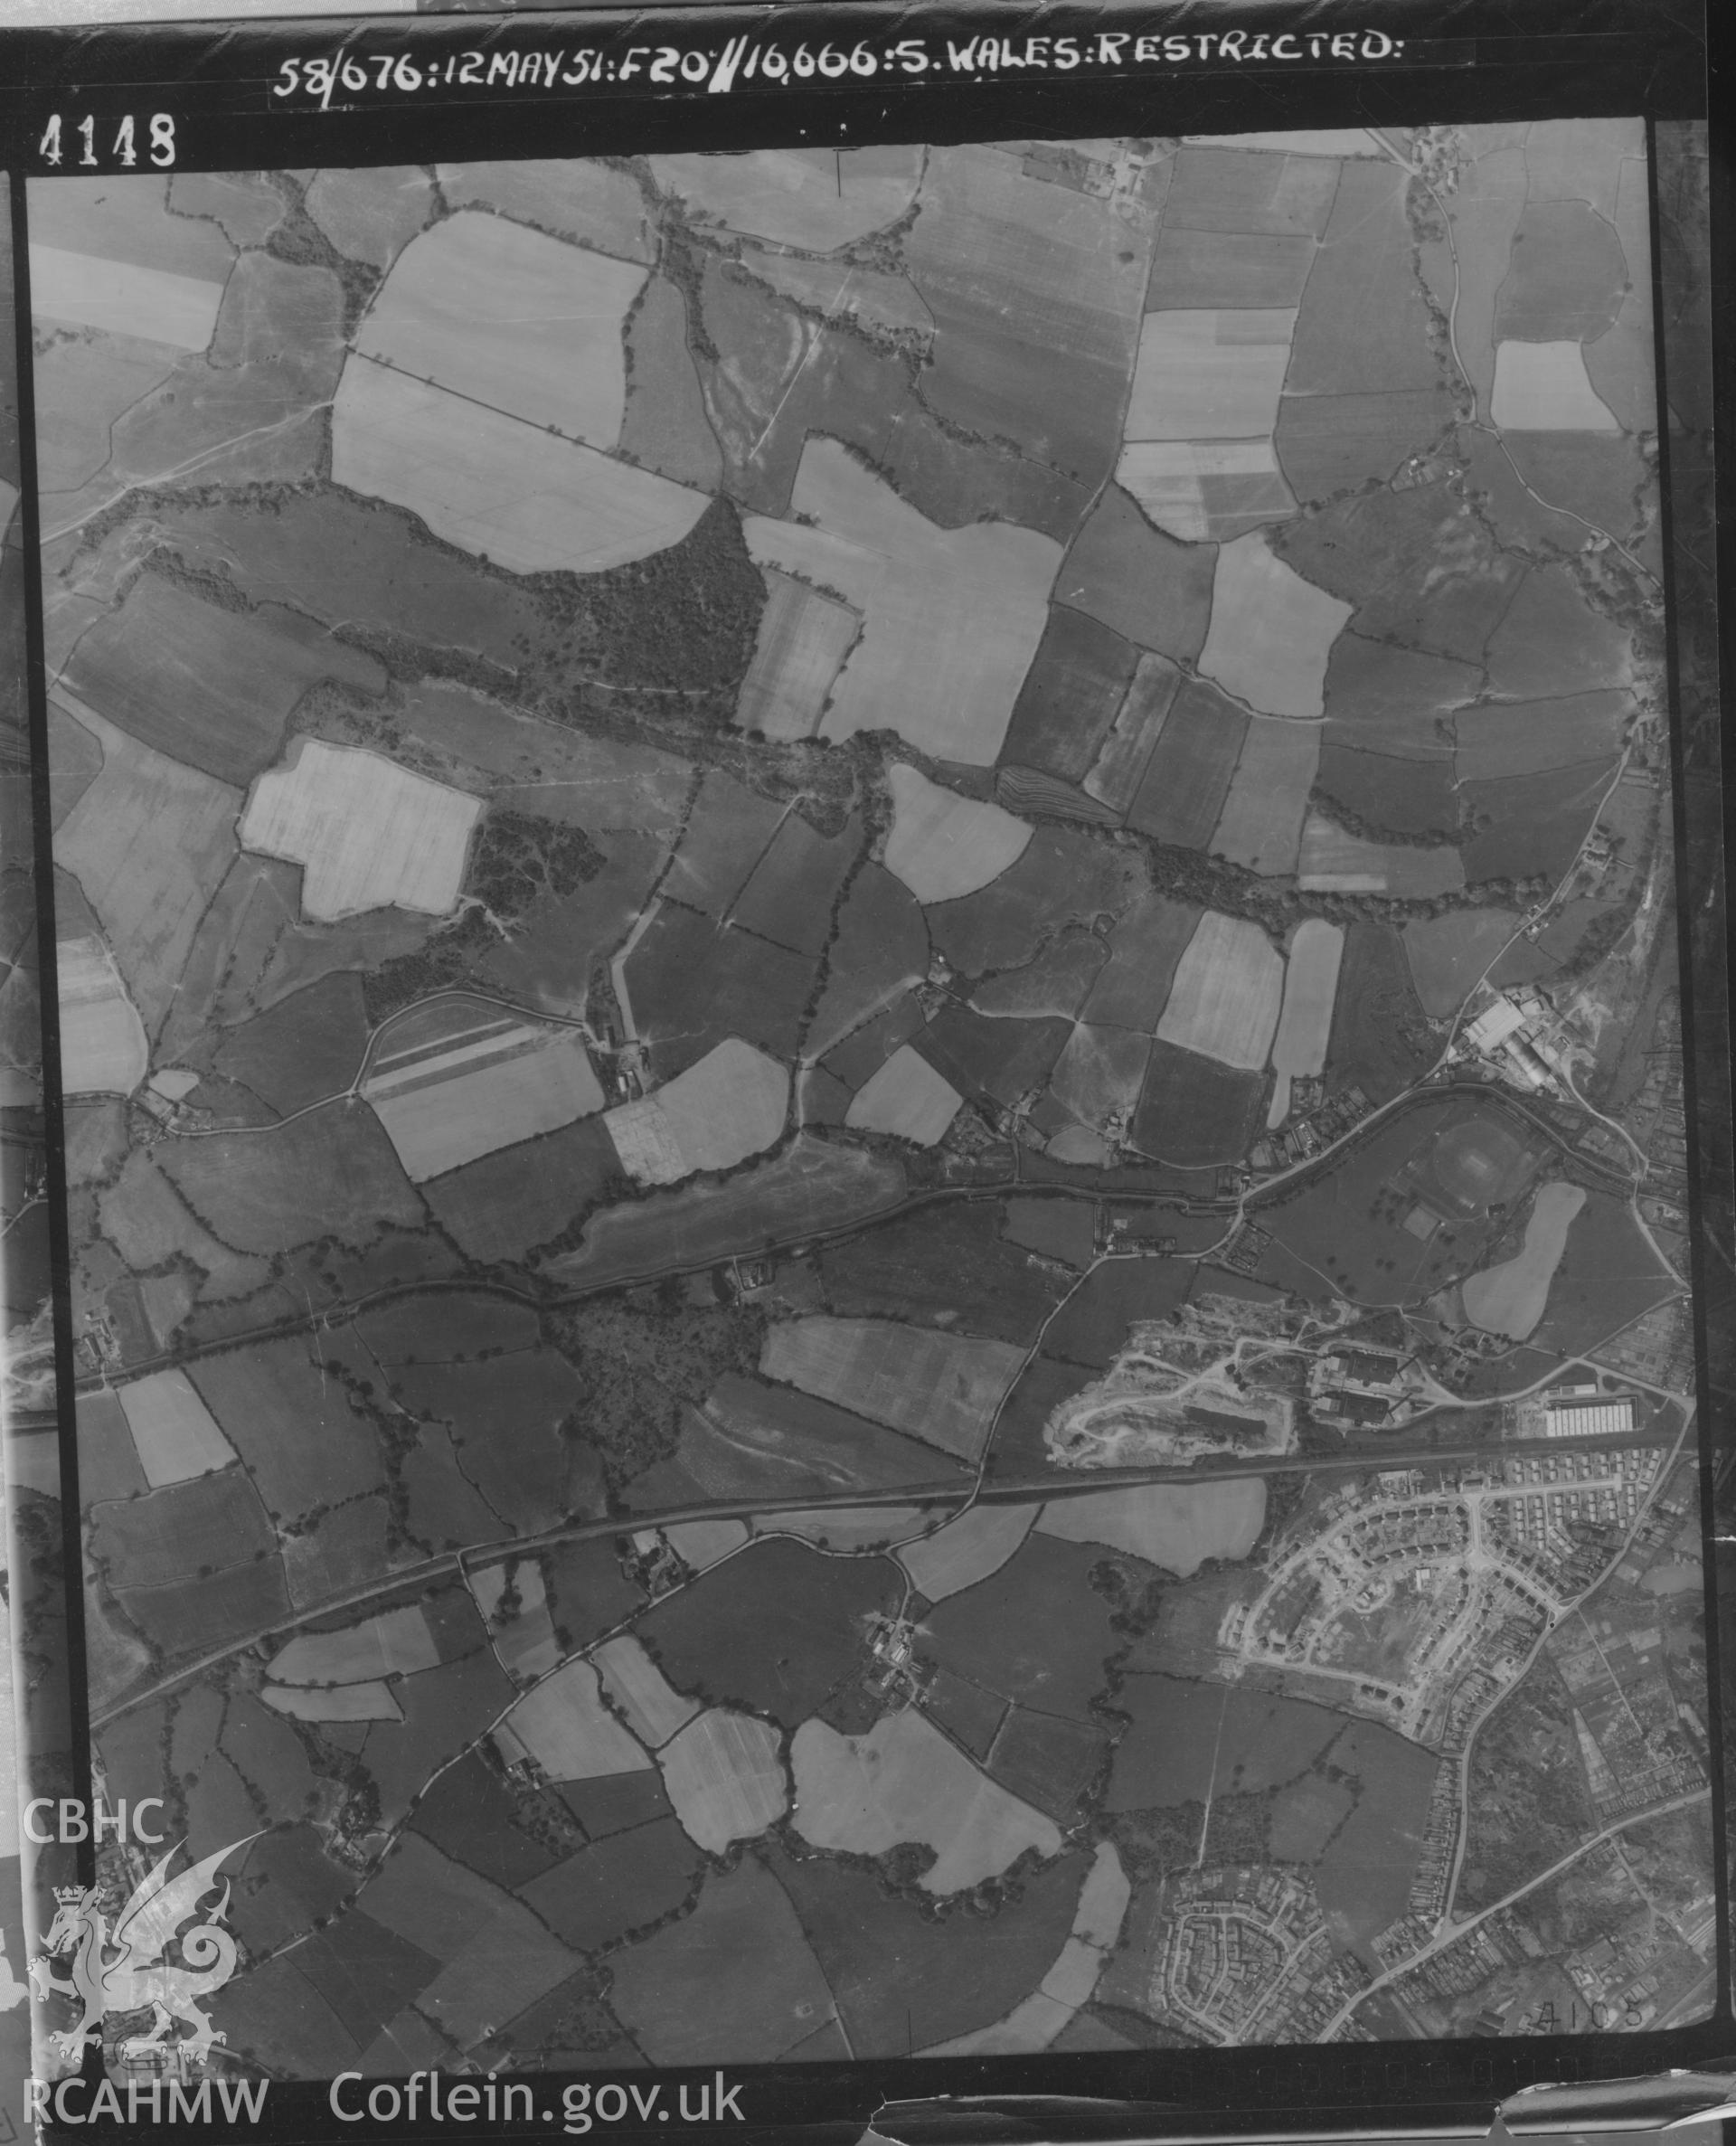 Aerial photograph of Cwmbran, taken on 3rd August 1950. Included as part of Archaeology Wales' desk based assessment of former Llantarnam Community Primary School, Croeswen, Oakfield, Cwmbran, conducted in 2017.